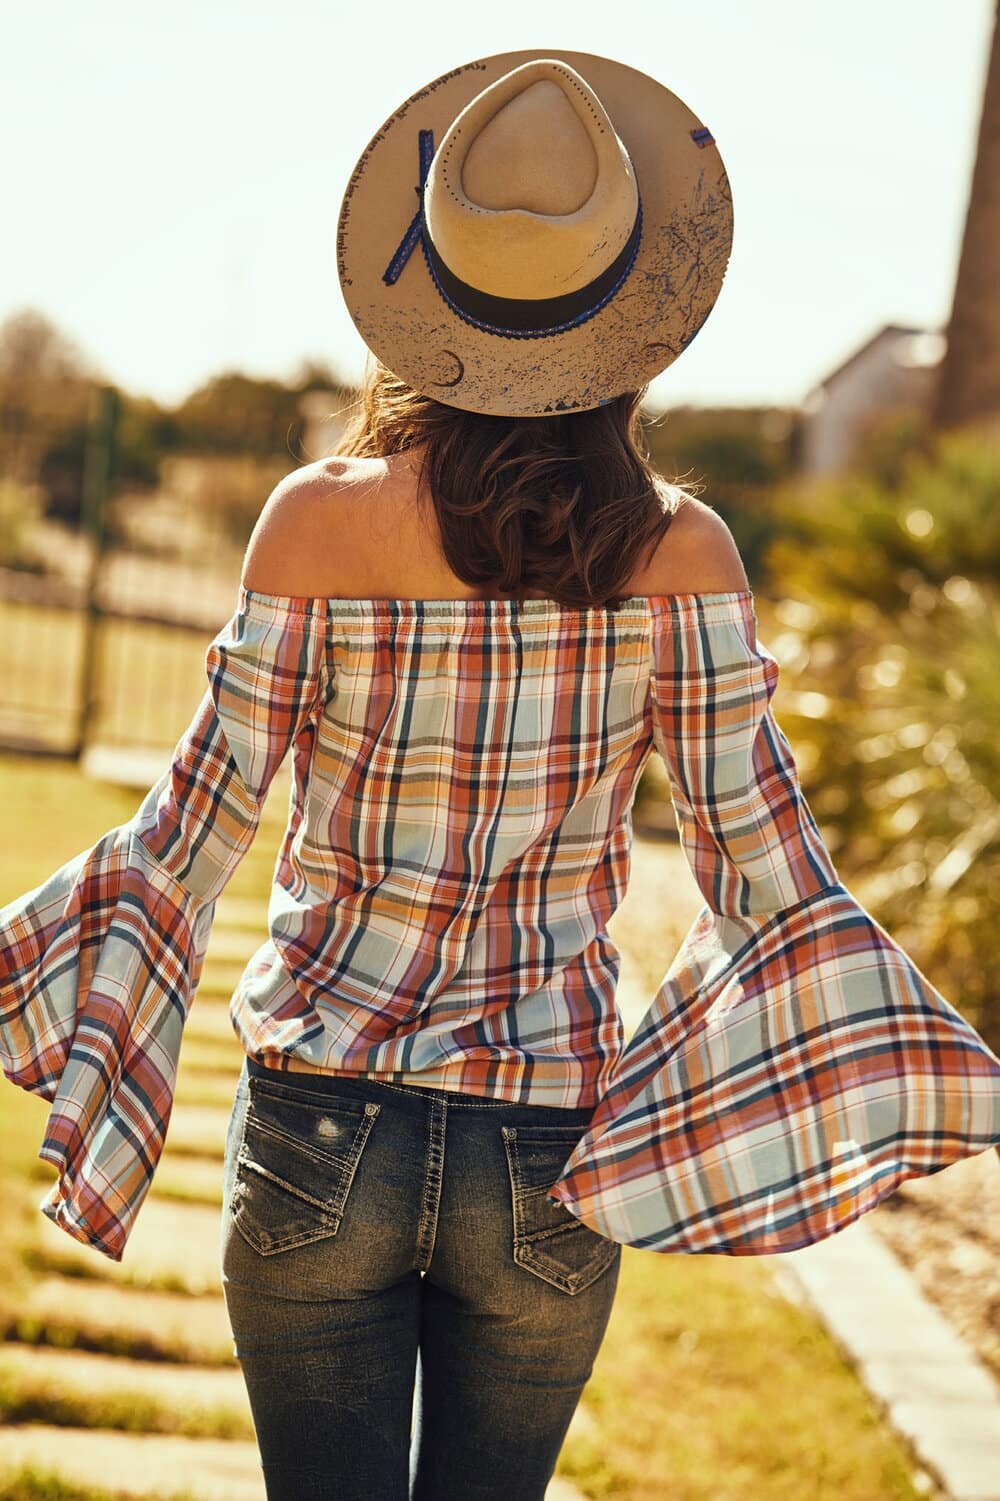 Backshot fashion photography of a model wearing a plaid off shoulders top and a cowboy hat